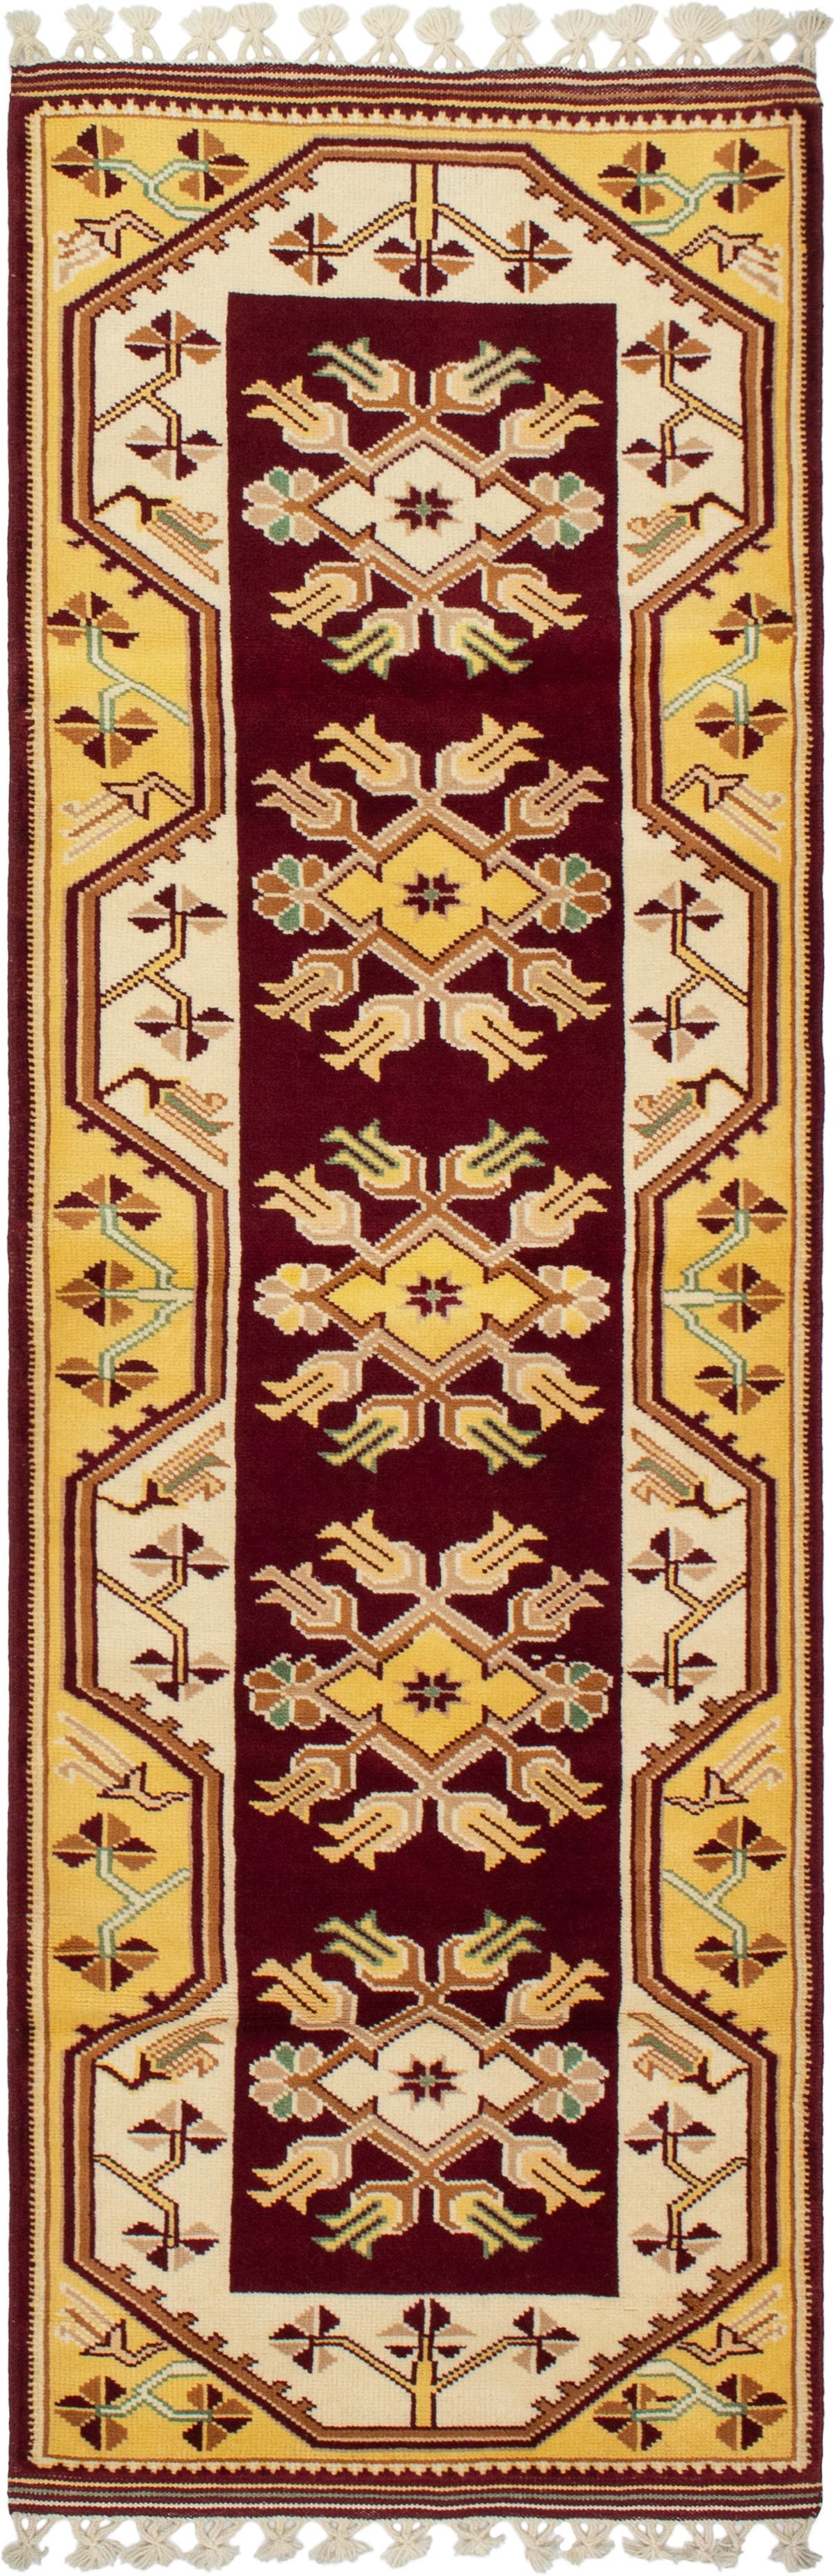 Hand-knotted Ushak Dark Red Wool Rug 2'9" x 8'2" Size: 2'9" x 8'2"  